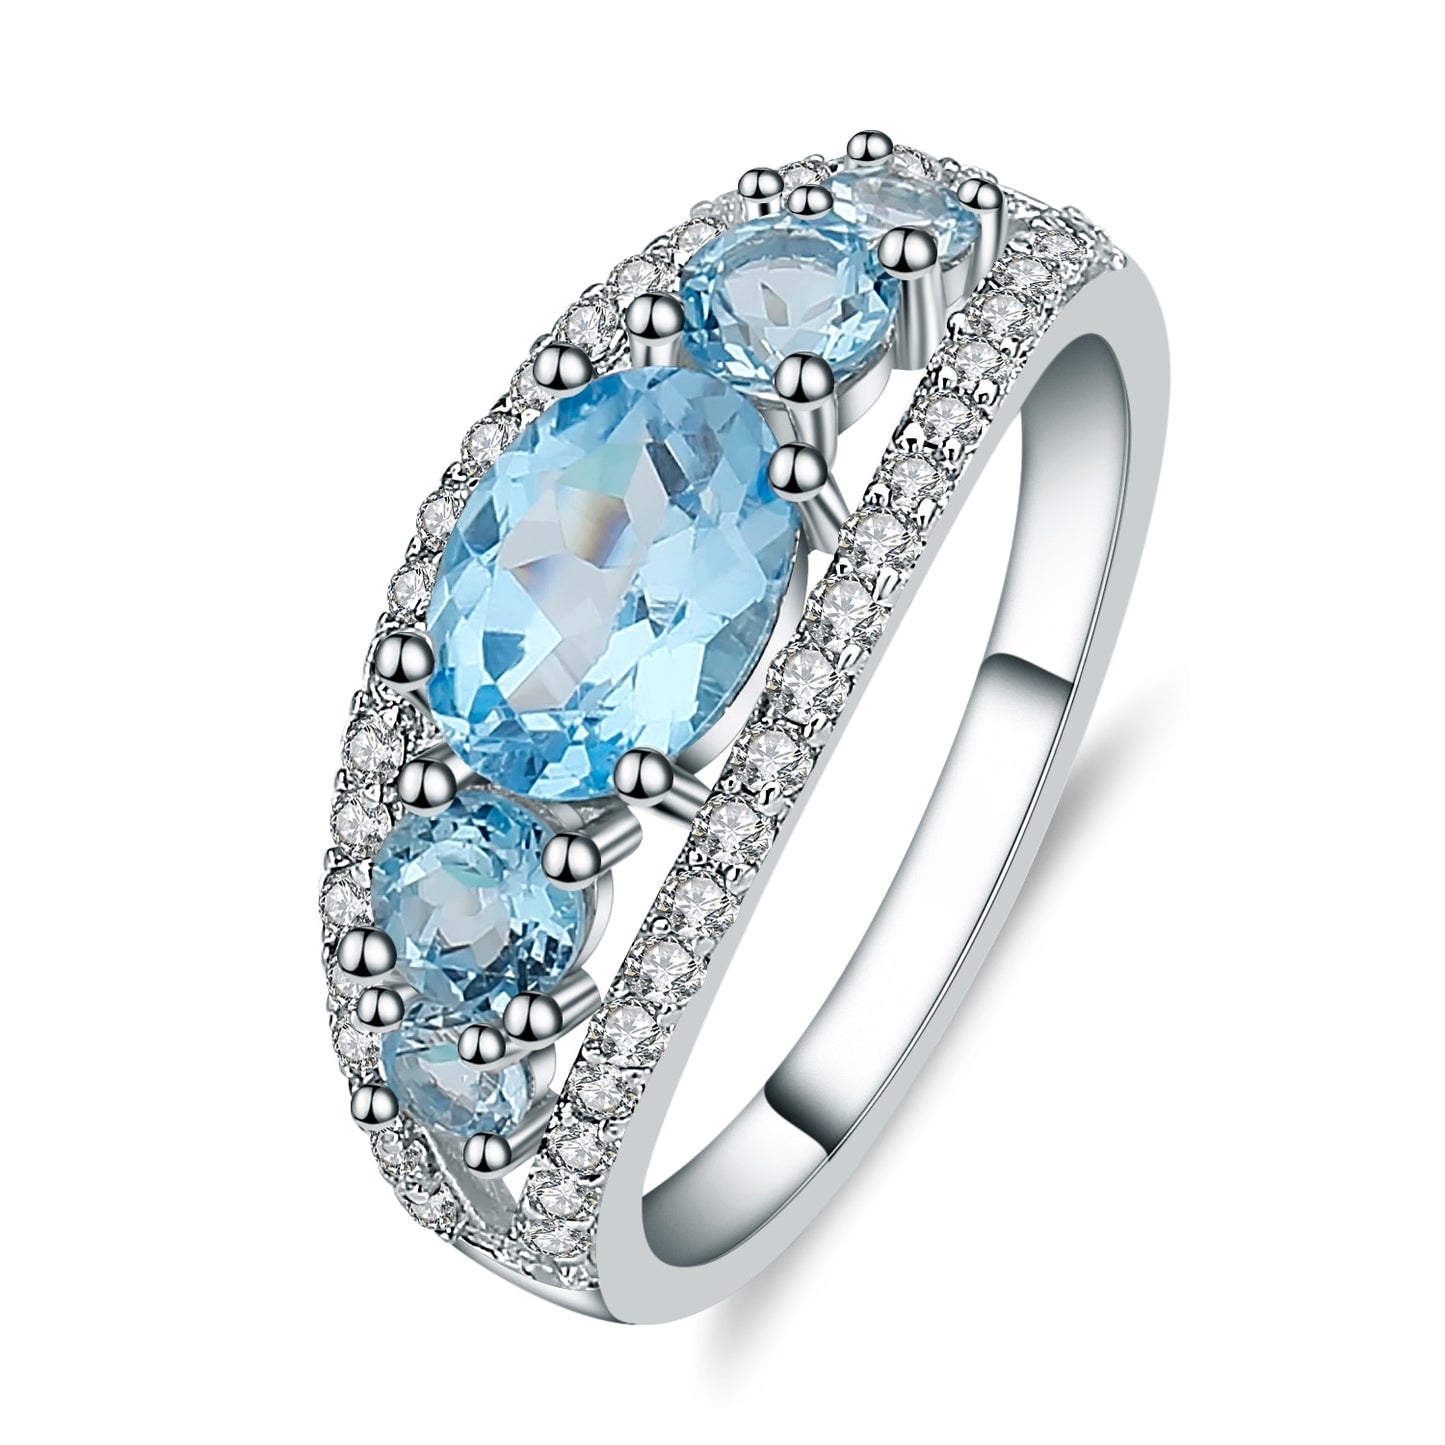 GEM&#39;S BALLET 2.55Ct Classic Natural Blue Topaz Gemstone Rings 925 Sterling Silver Oval Shape Ring For Women Fine Jewelry